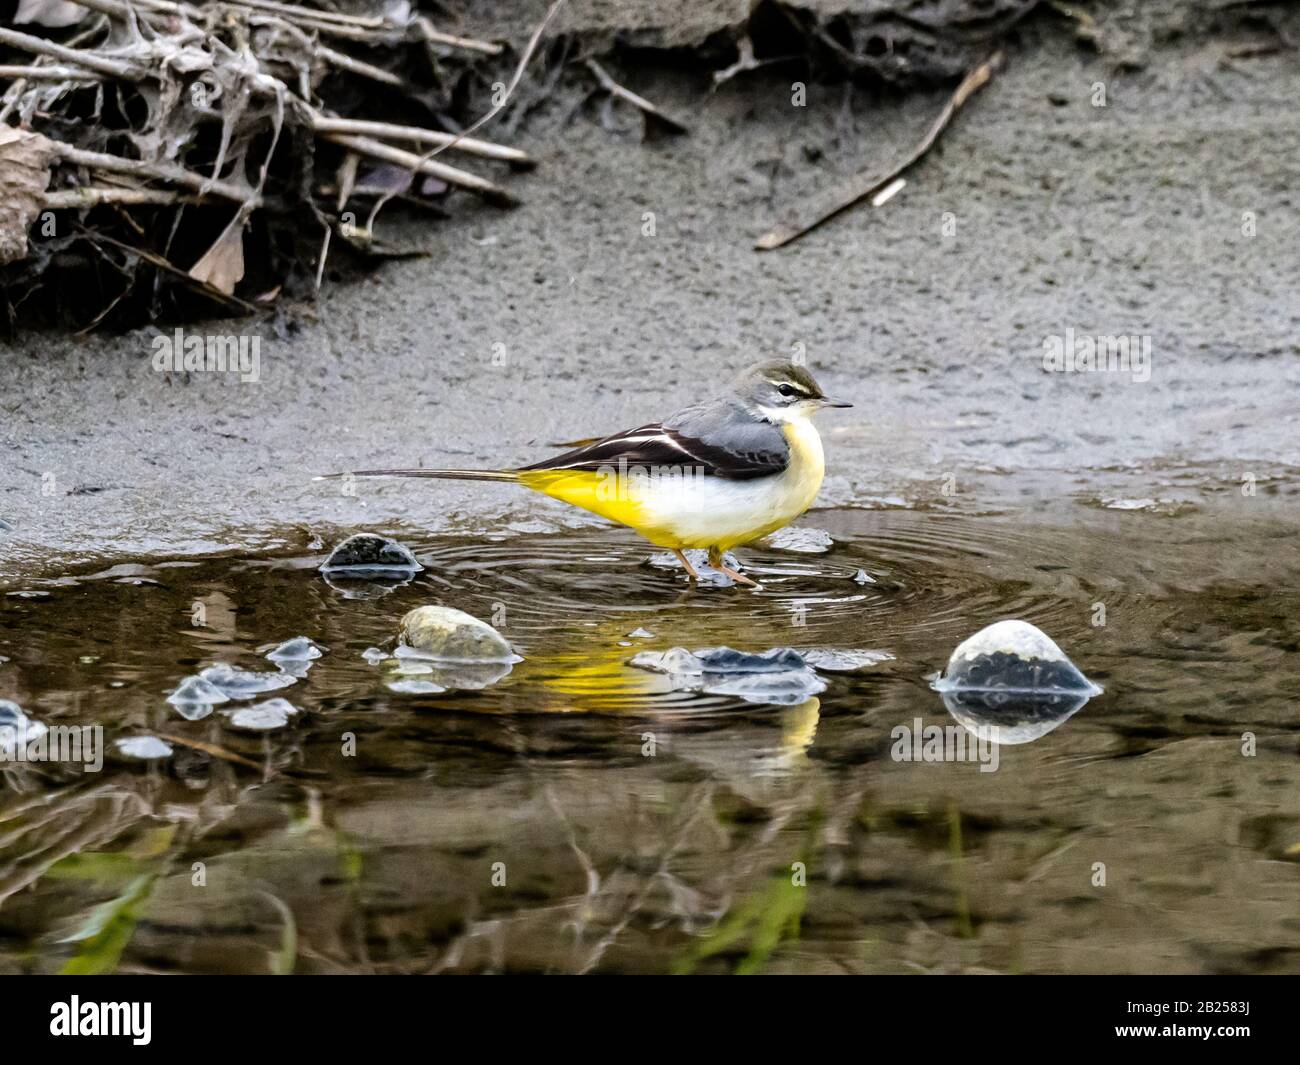 A colorful gray wagtail, Motacilla cinerea, walks beside a shallow backwater pond beside the Tama River in Tokyo, Japan. Stock Photo